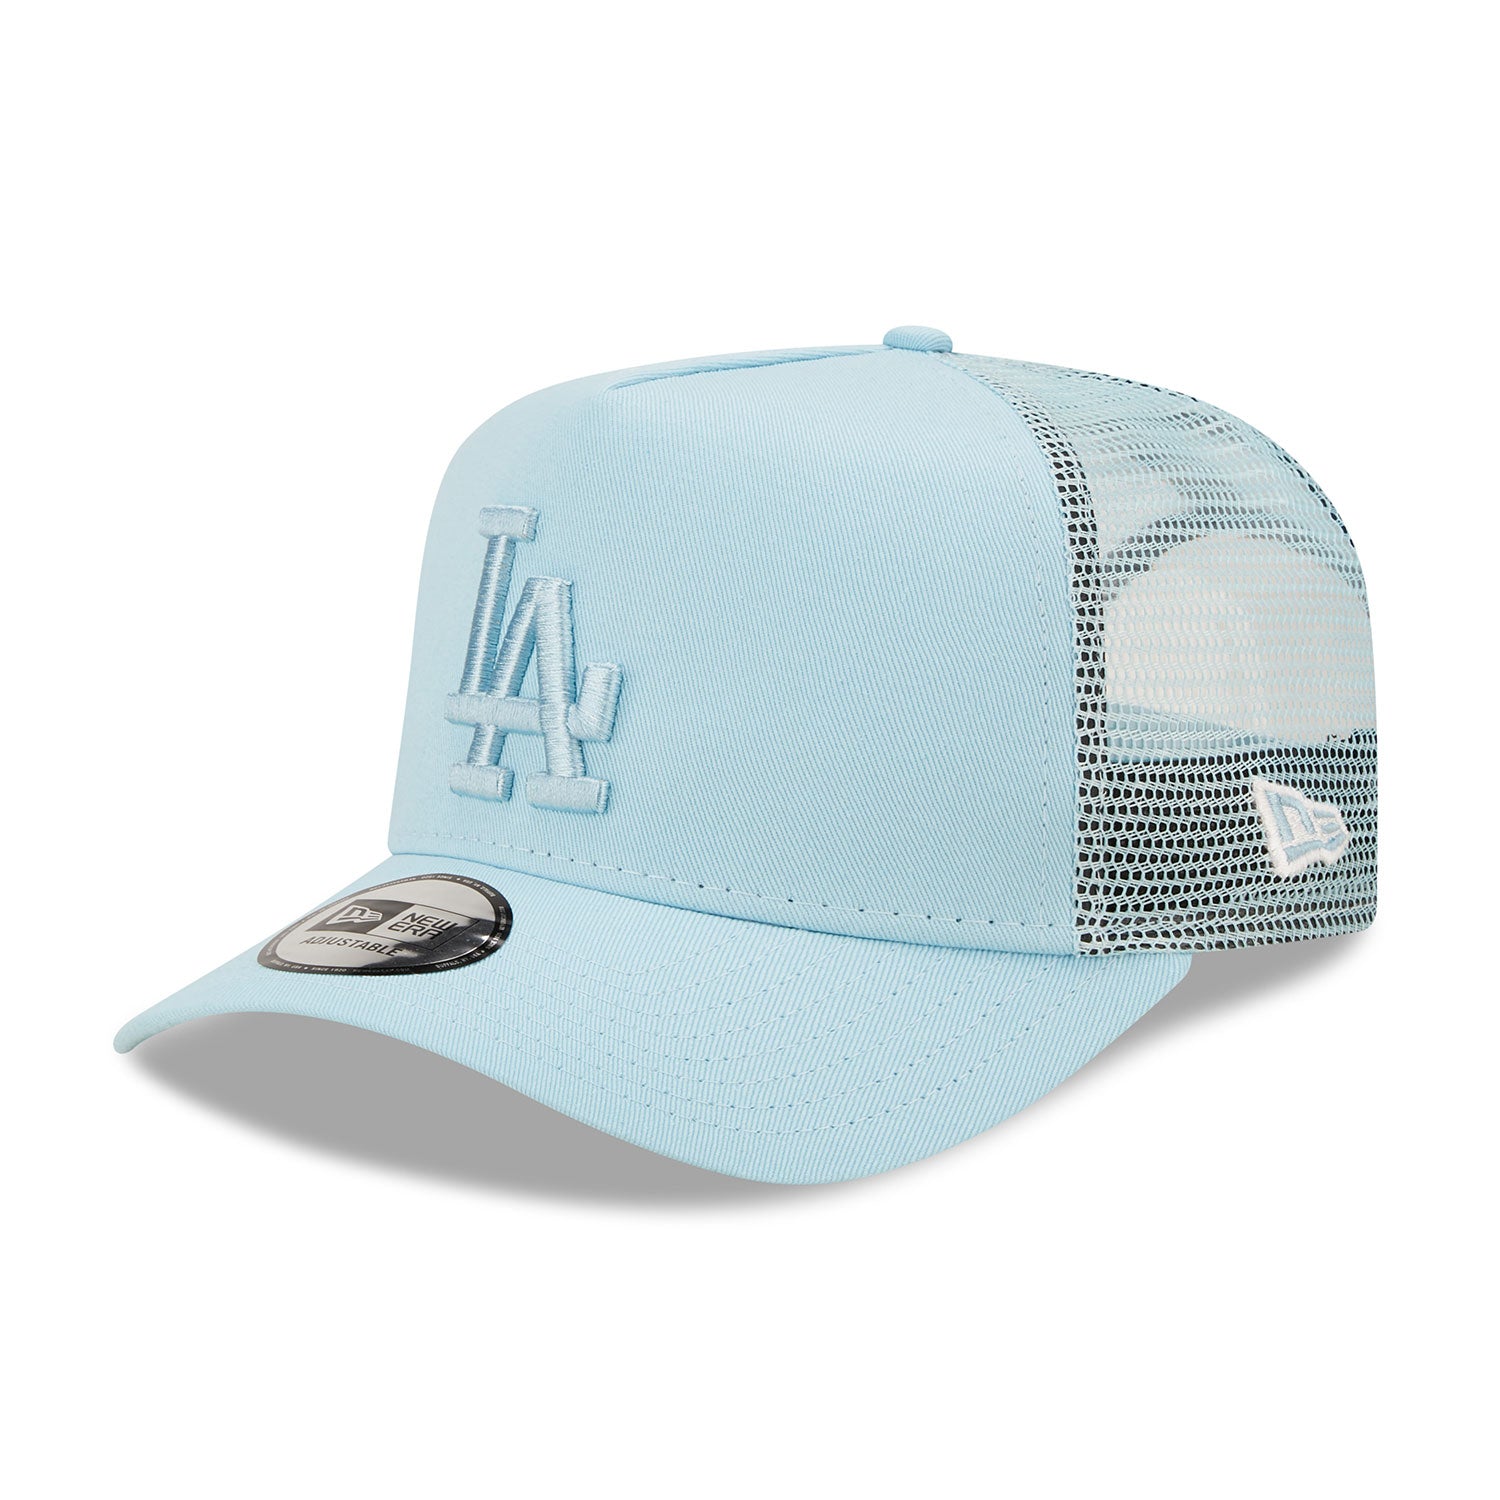 MLB Youth The League LA Dodgers 9Forty Adjustable Cap, Blue